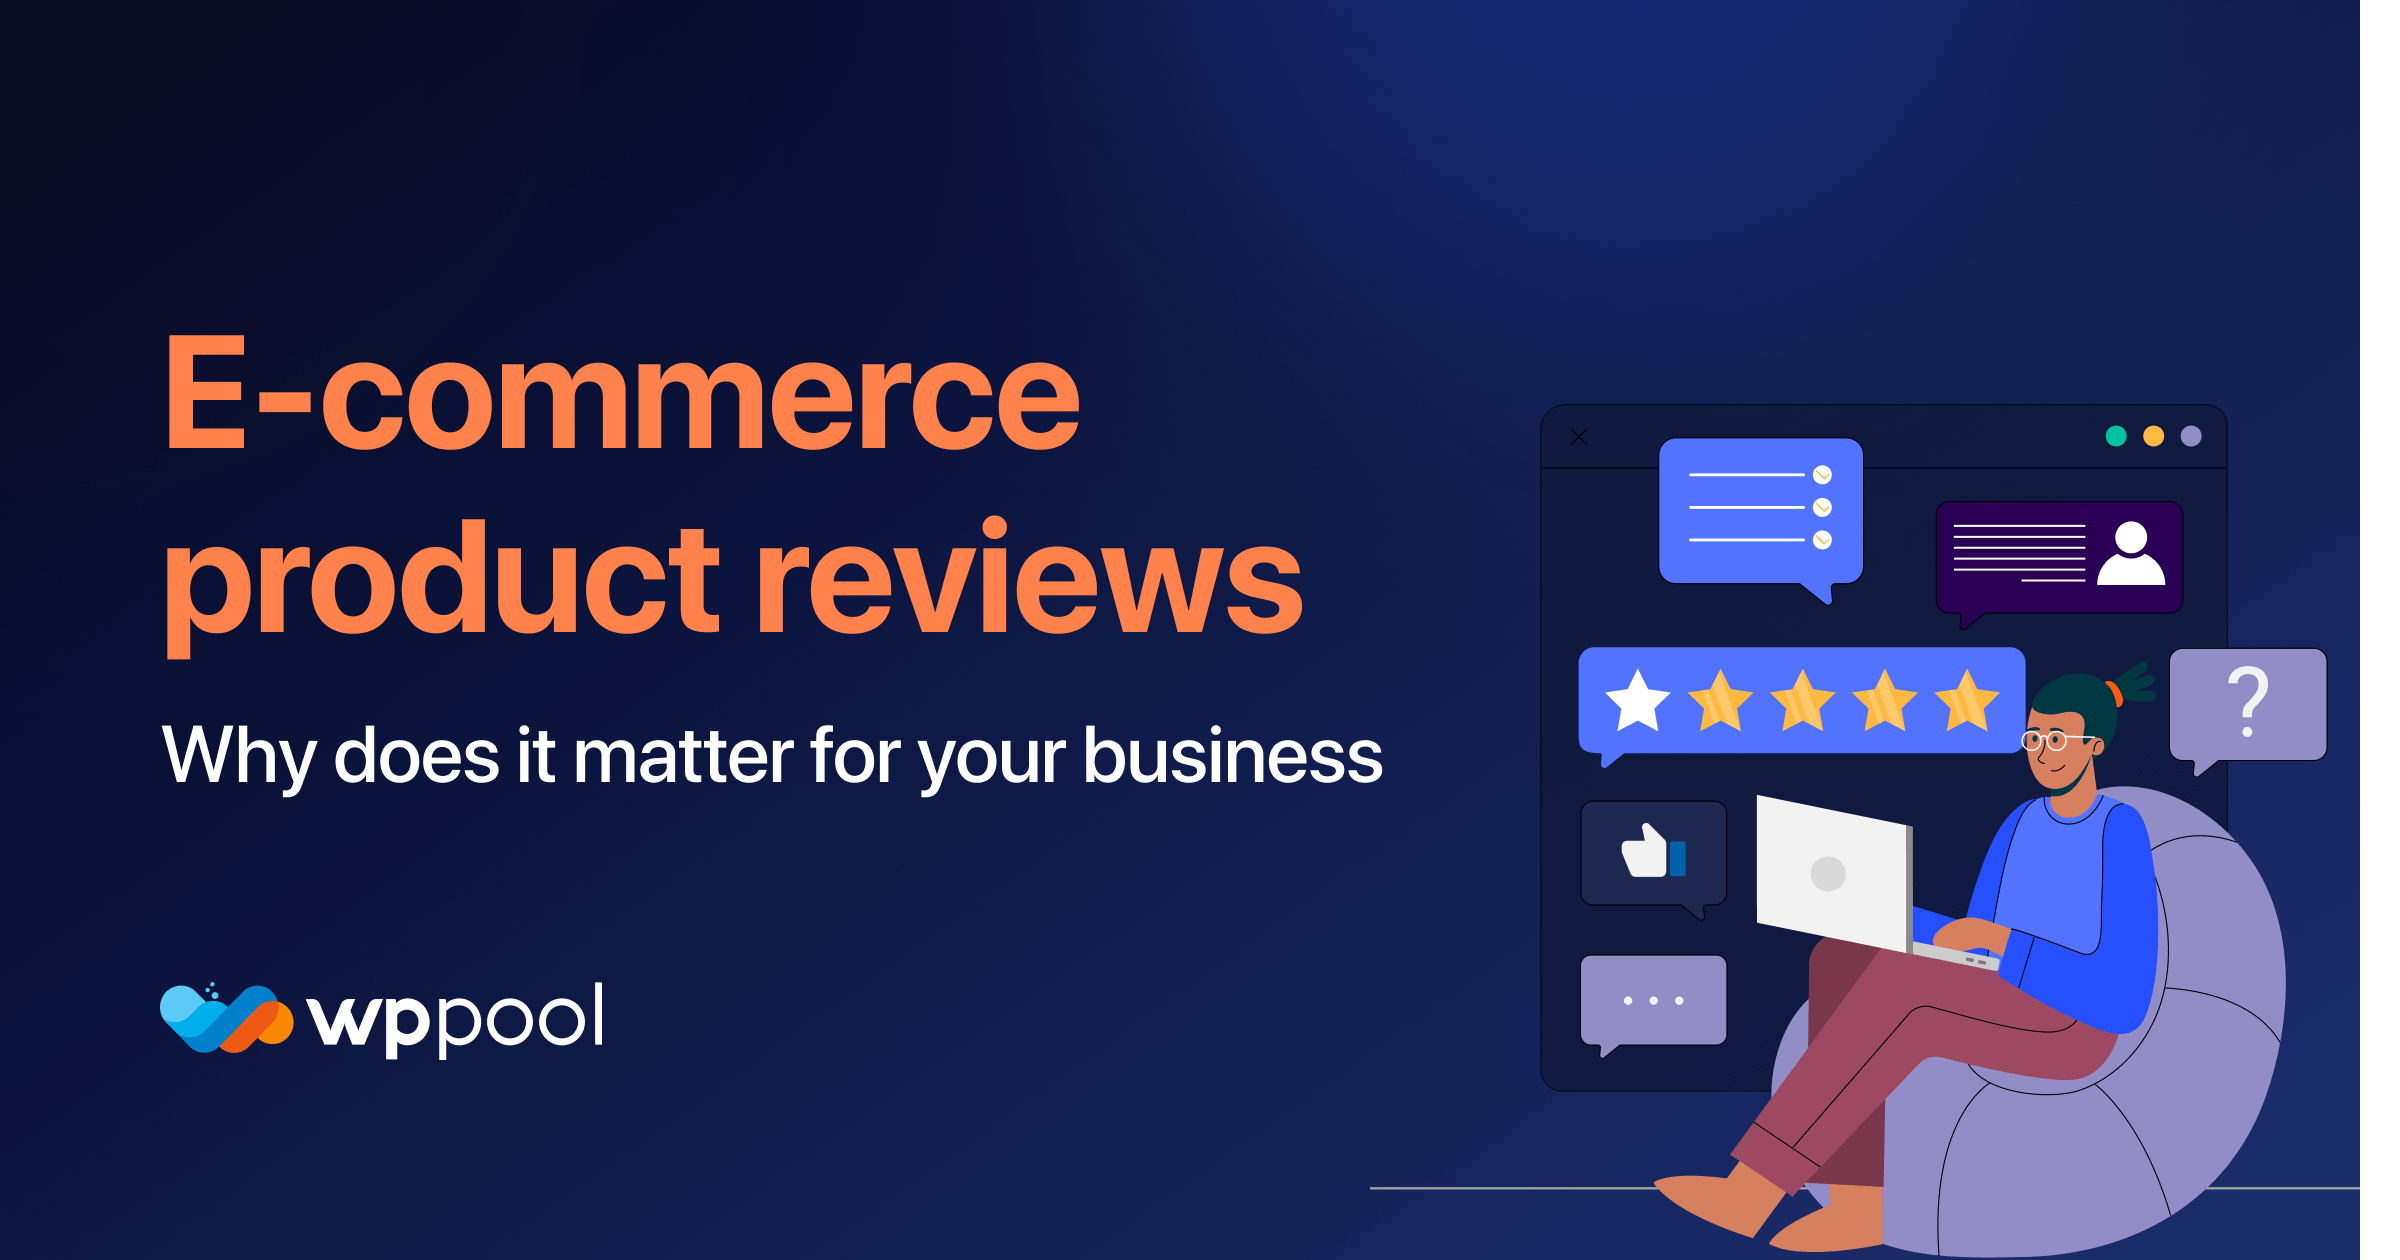 Ecommerce product reviews: Why does it matter for your business